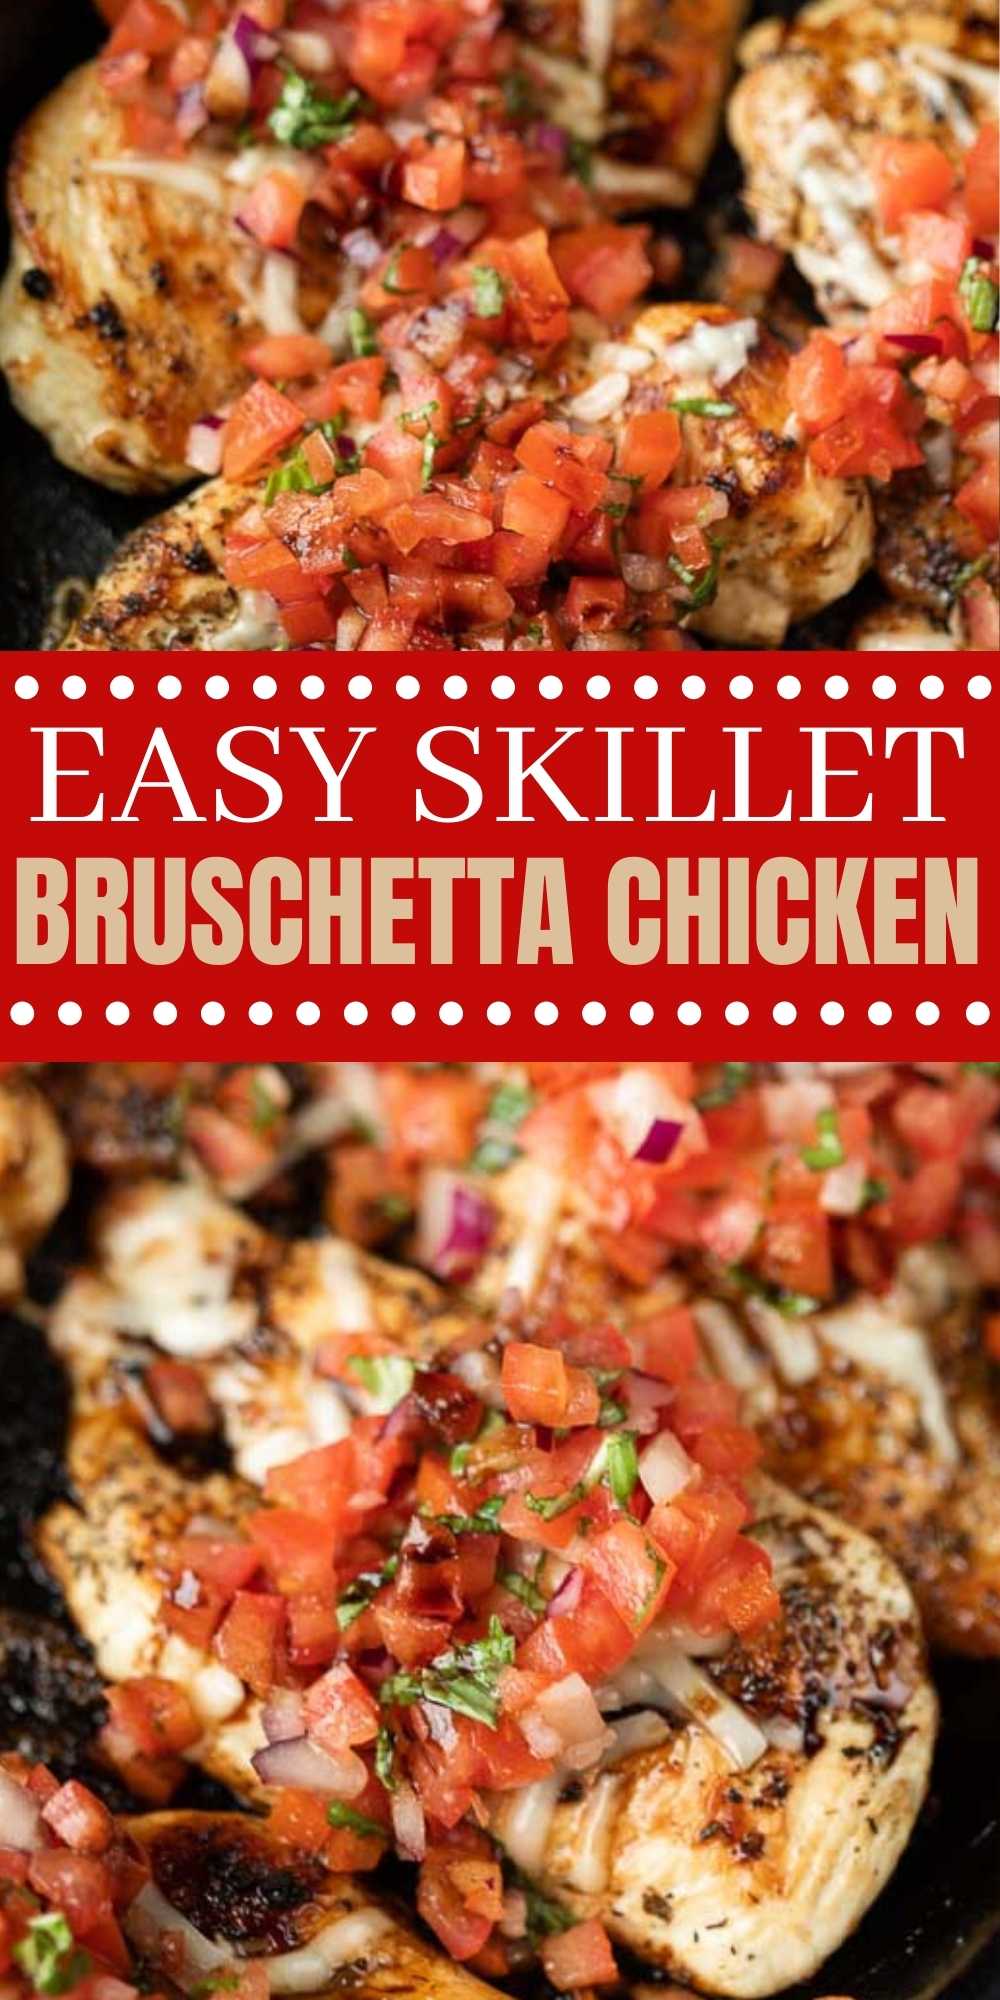 This Bruschetta Chicken recipe is made with mozzarella cheese, then topped with the easiest and the best fresh bruschetta. You will love this Bruschetta Chicken bake that is easy to make and healthy too! #eatingonadime #skilletrecipes #chickenrecipes #bruschettarecipes 
